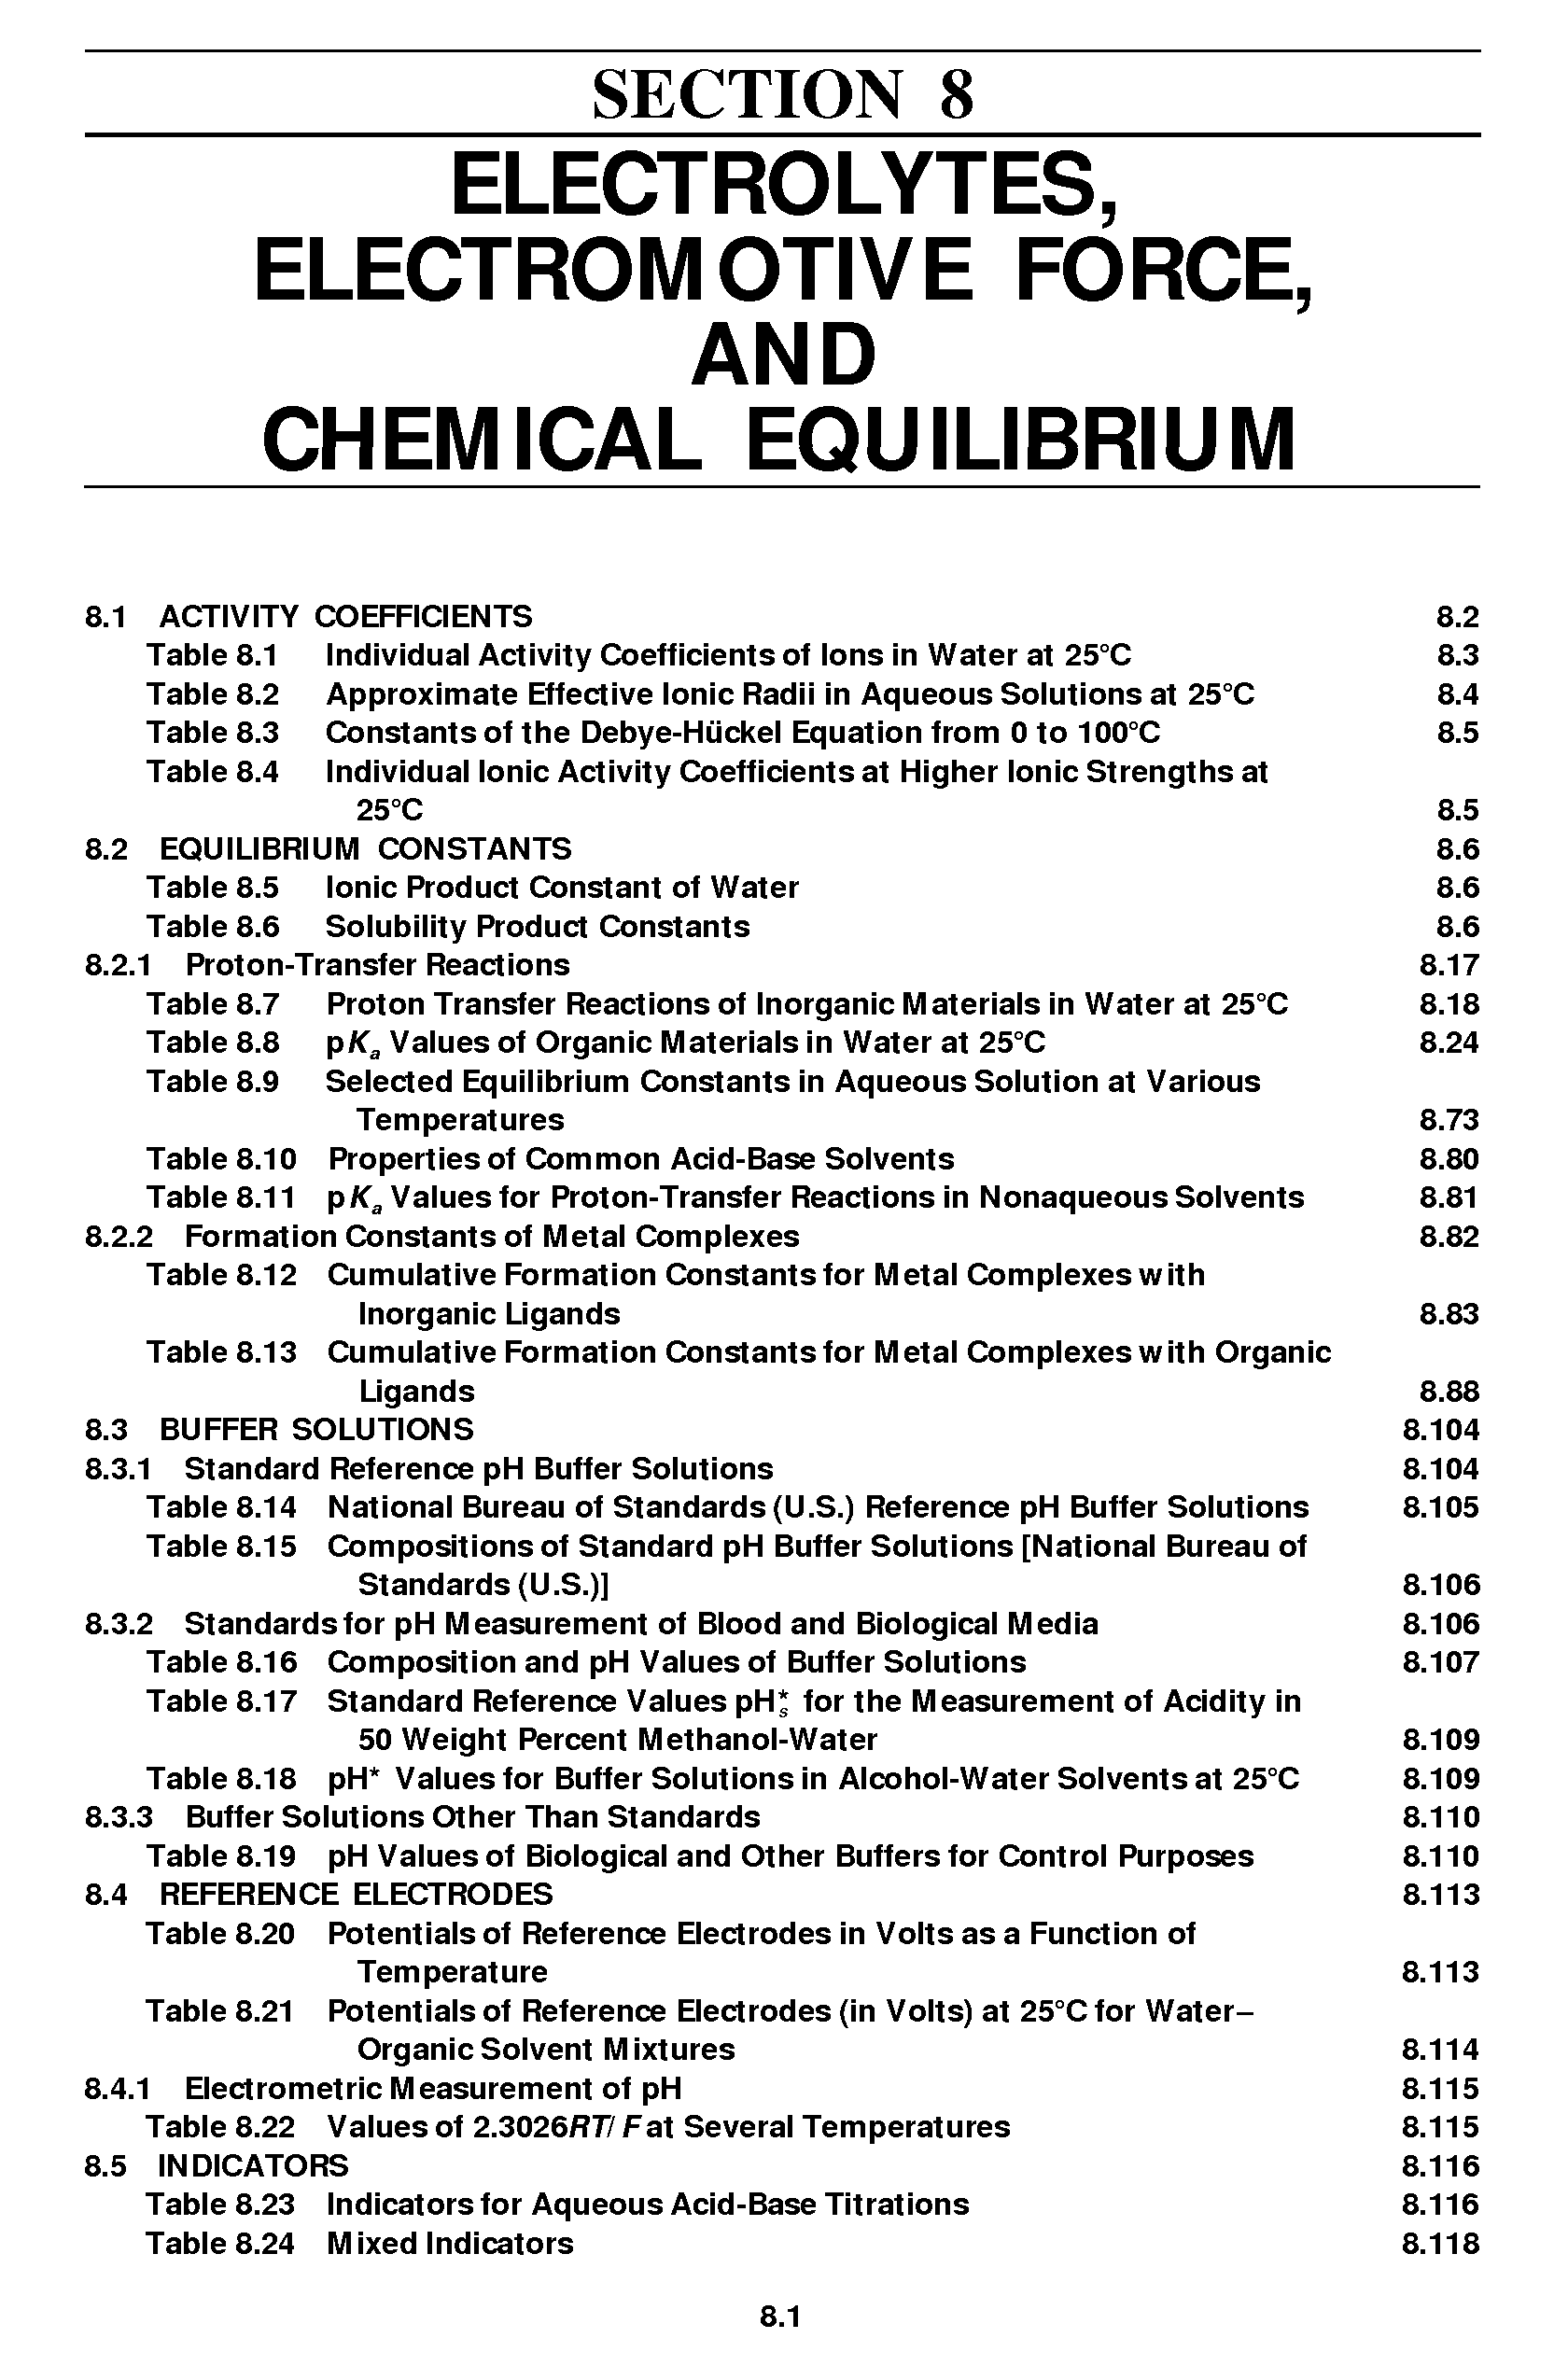 Table 8.9 Selected Equilibrium Constants in Aqueous Solution at Various...